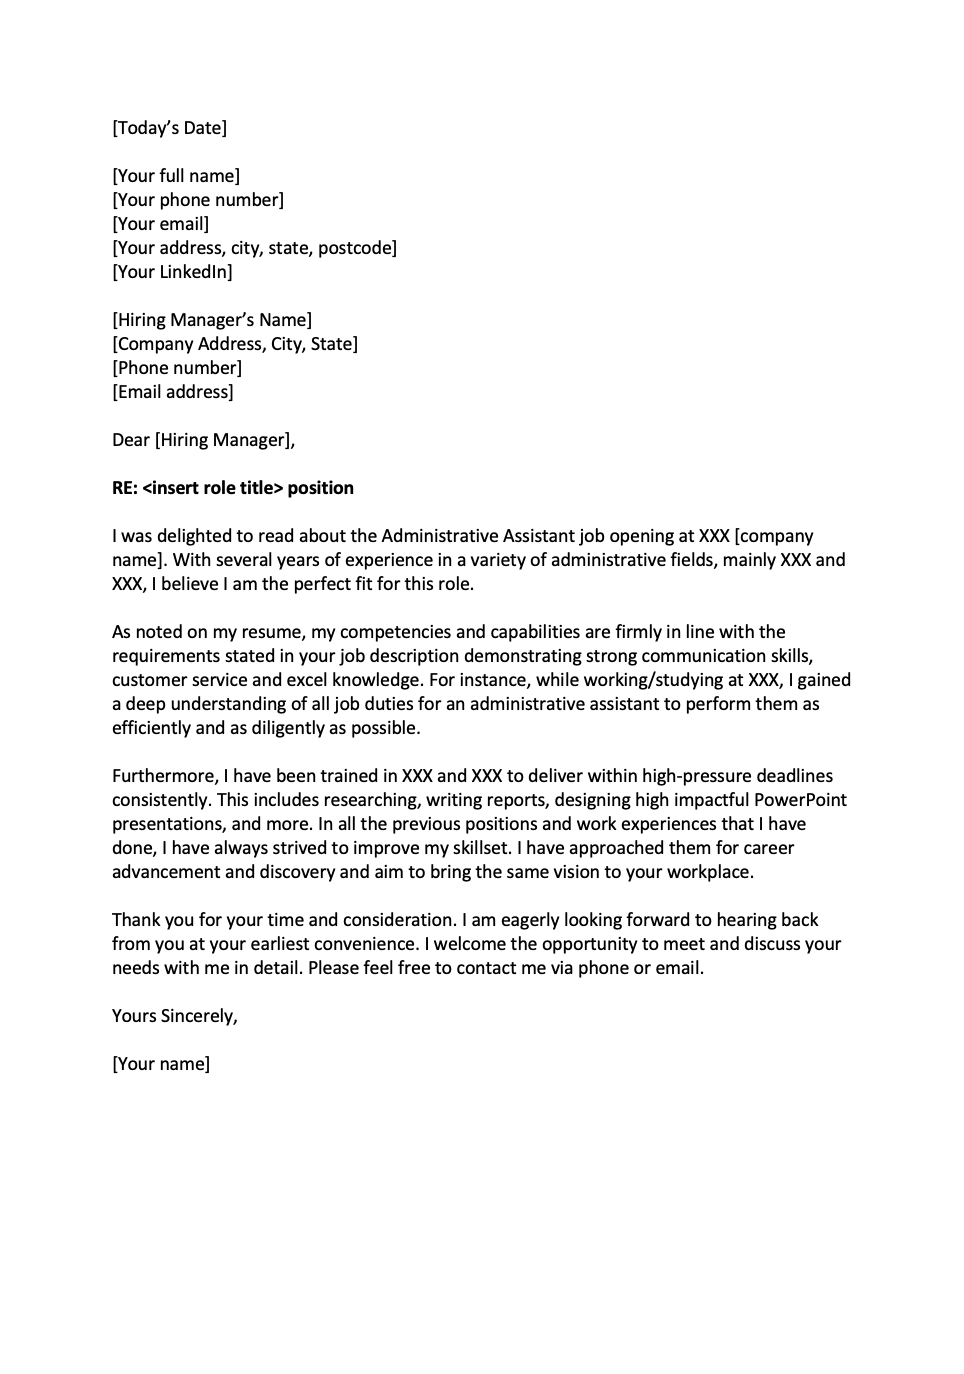 pdf of cover letter